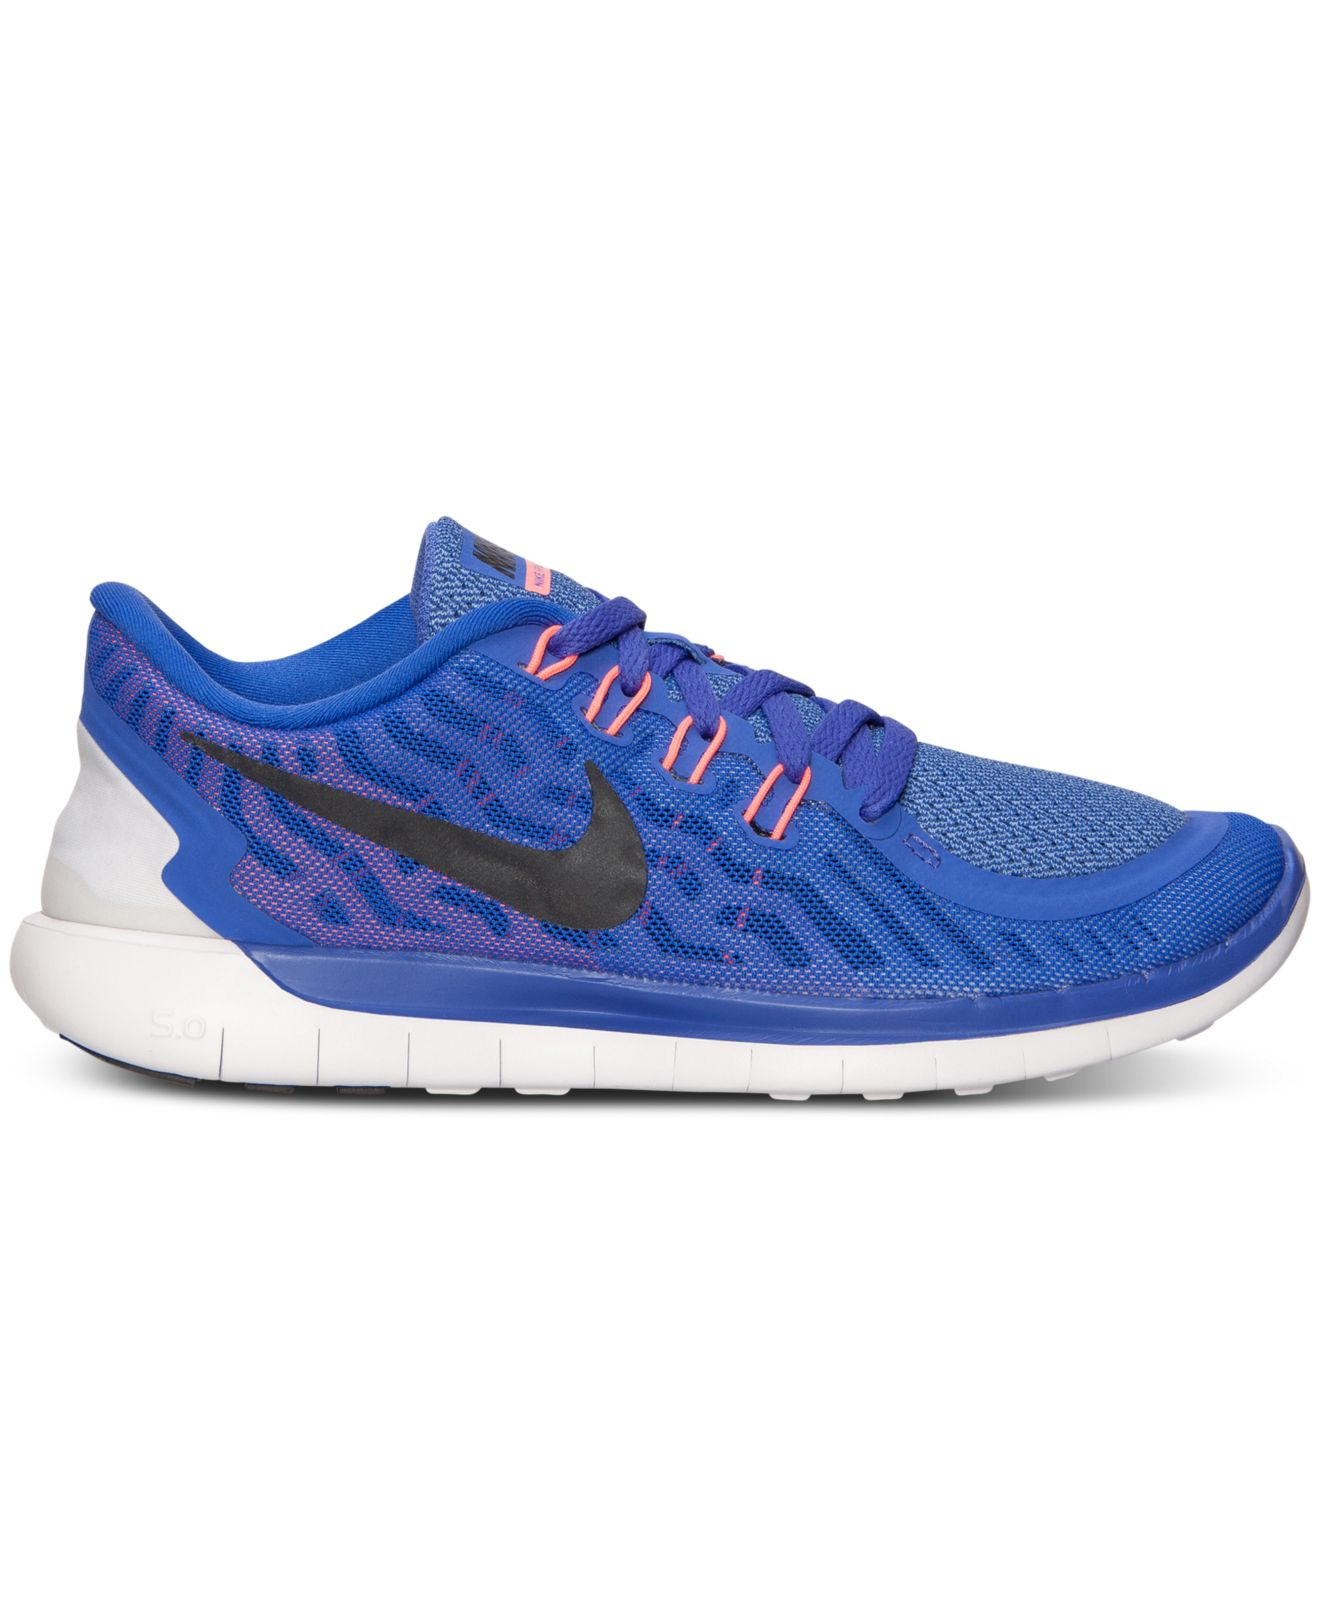 Lyst - Nike Women's Free 5.0 Running Sneakers From Finish Line in Blue